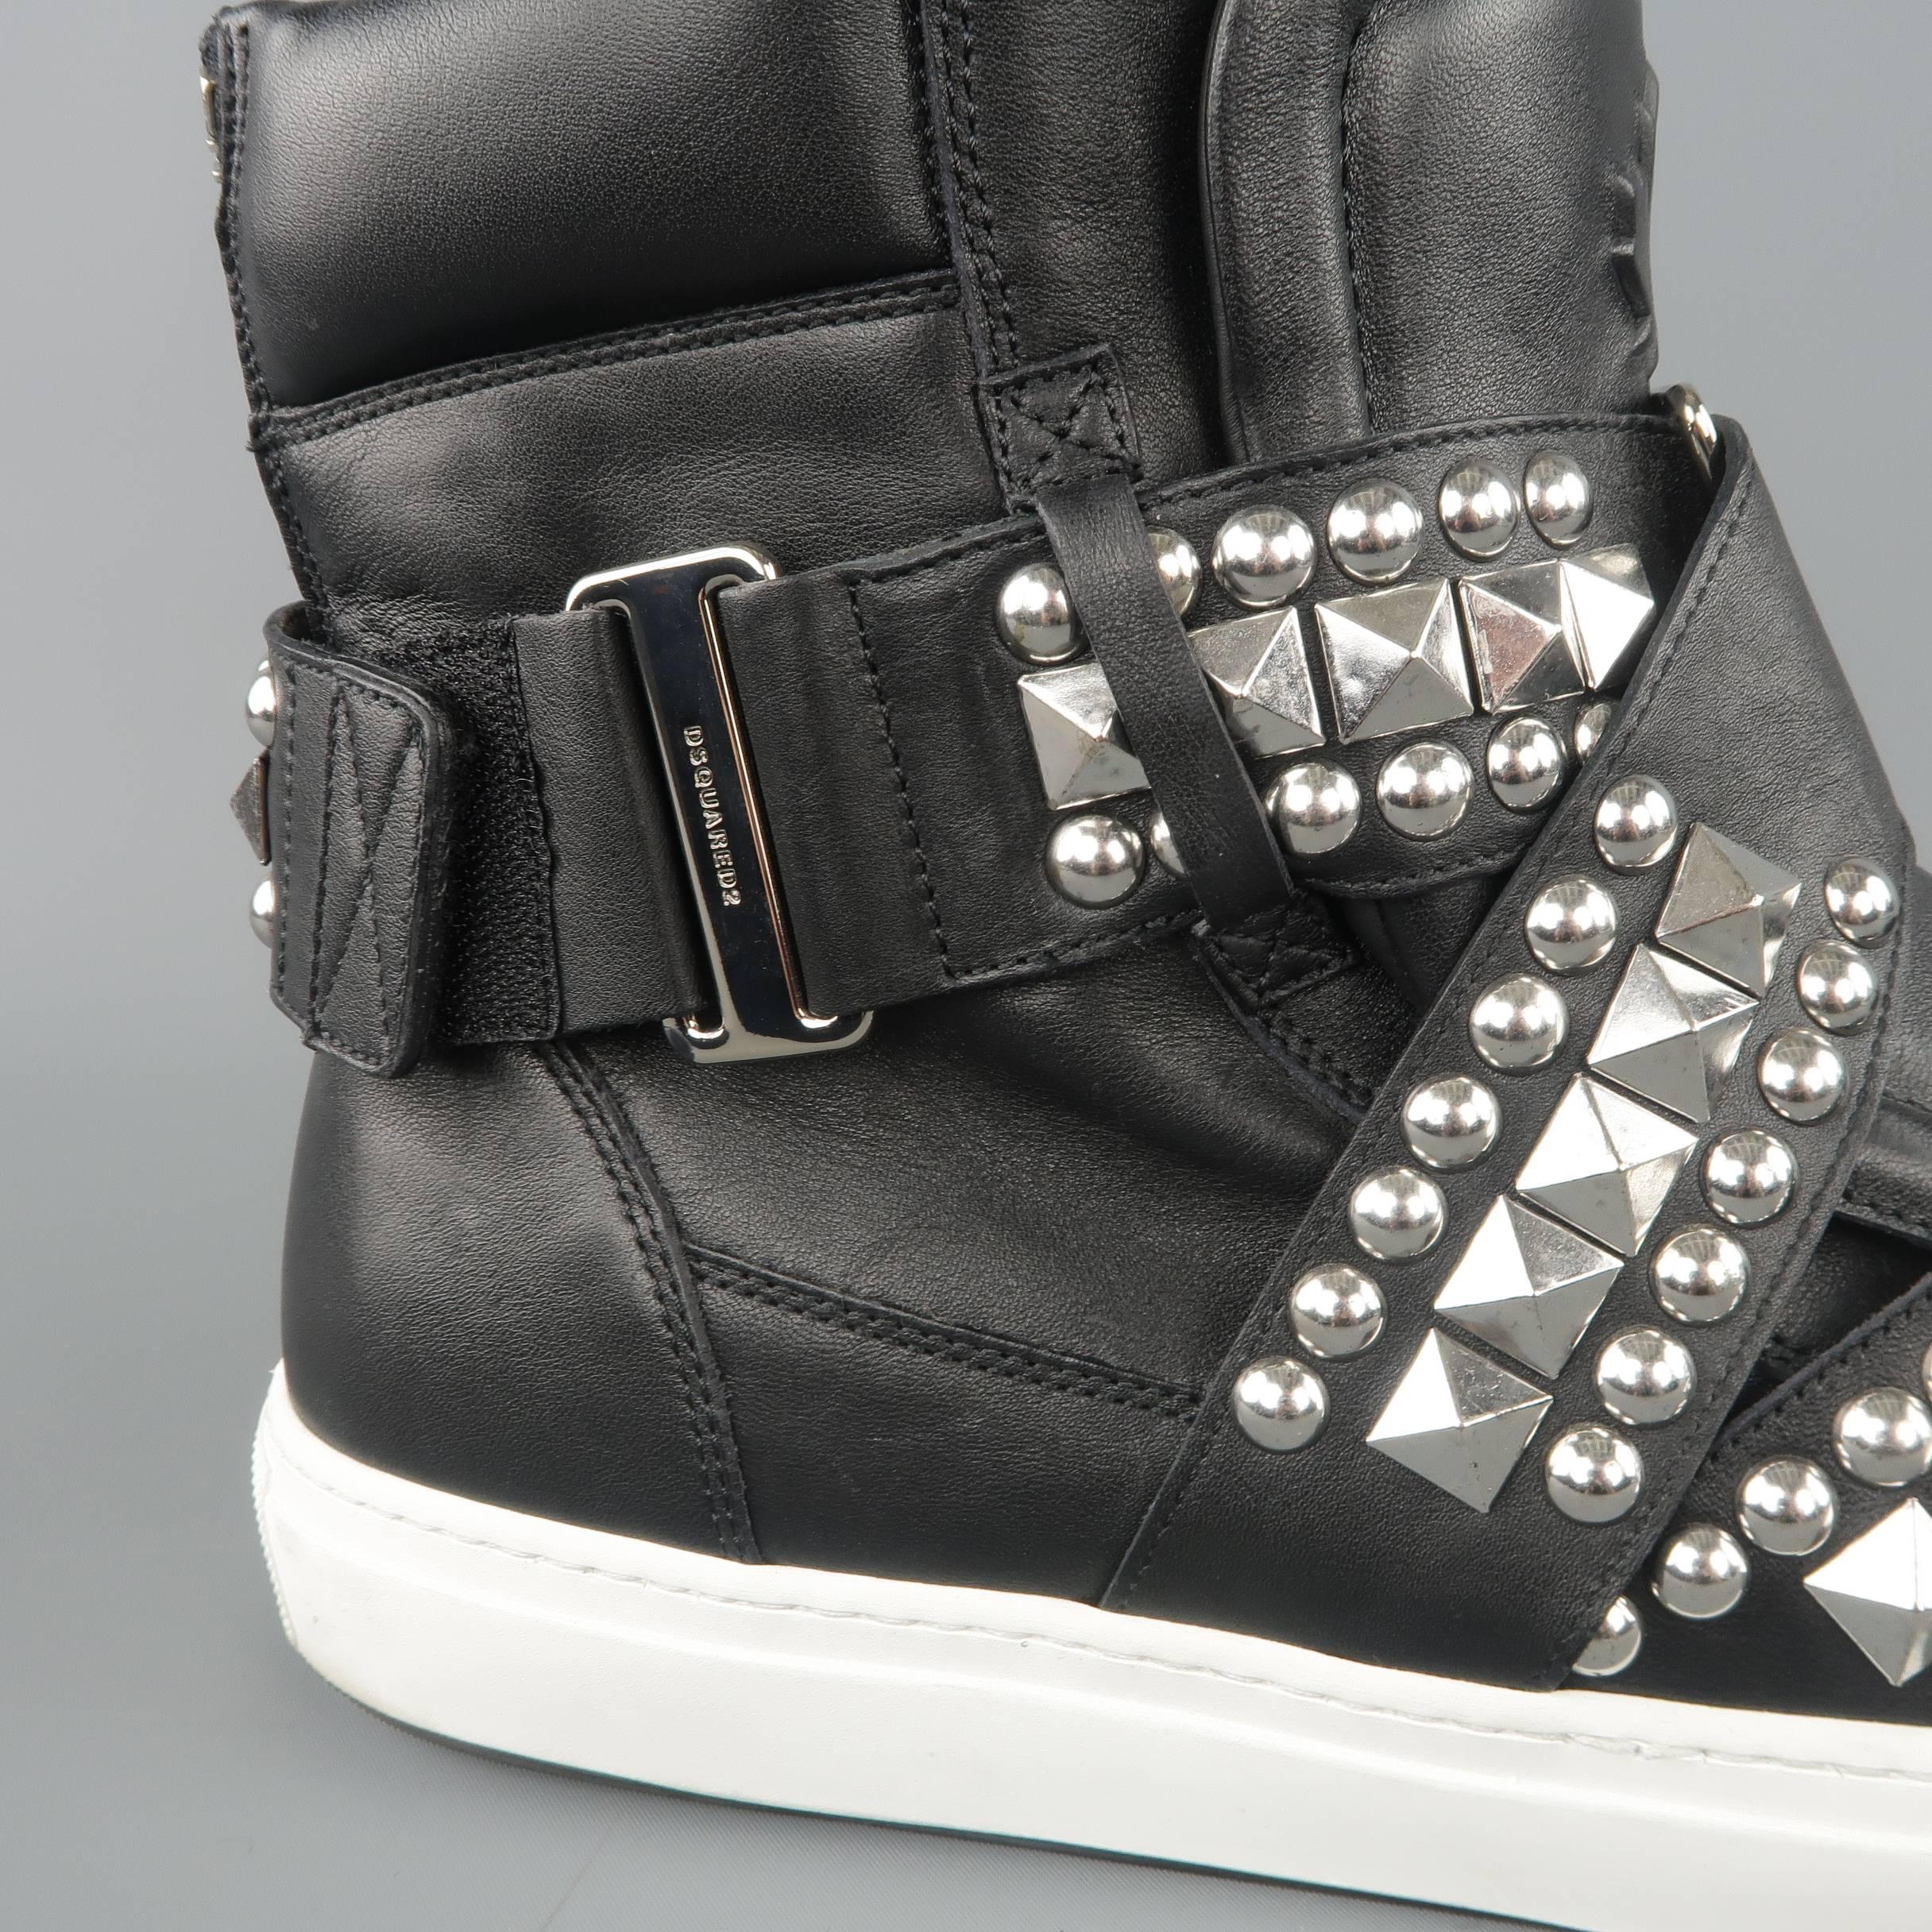 DSQUARED2 high top sneakers come in smooth black leather with a maple leaf embossed tongue, white rubber sole, and silver tone studded velcro harness straps. With box. Made in Italy.
 
Excellent Pre-Owned Condition.
Marked: IT 43
 
Outsole: 12 x 4